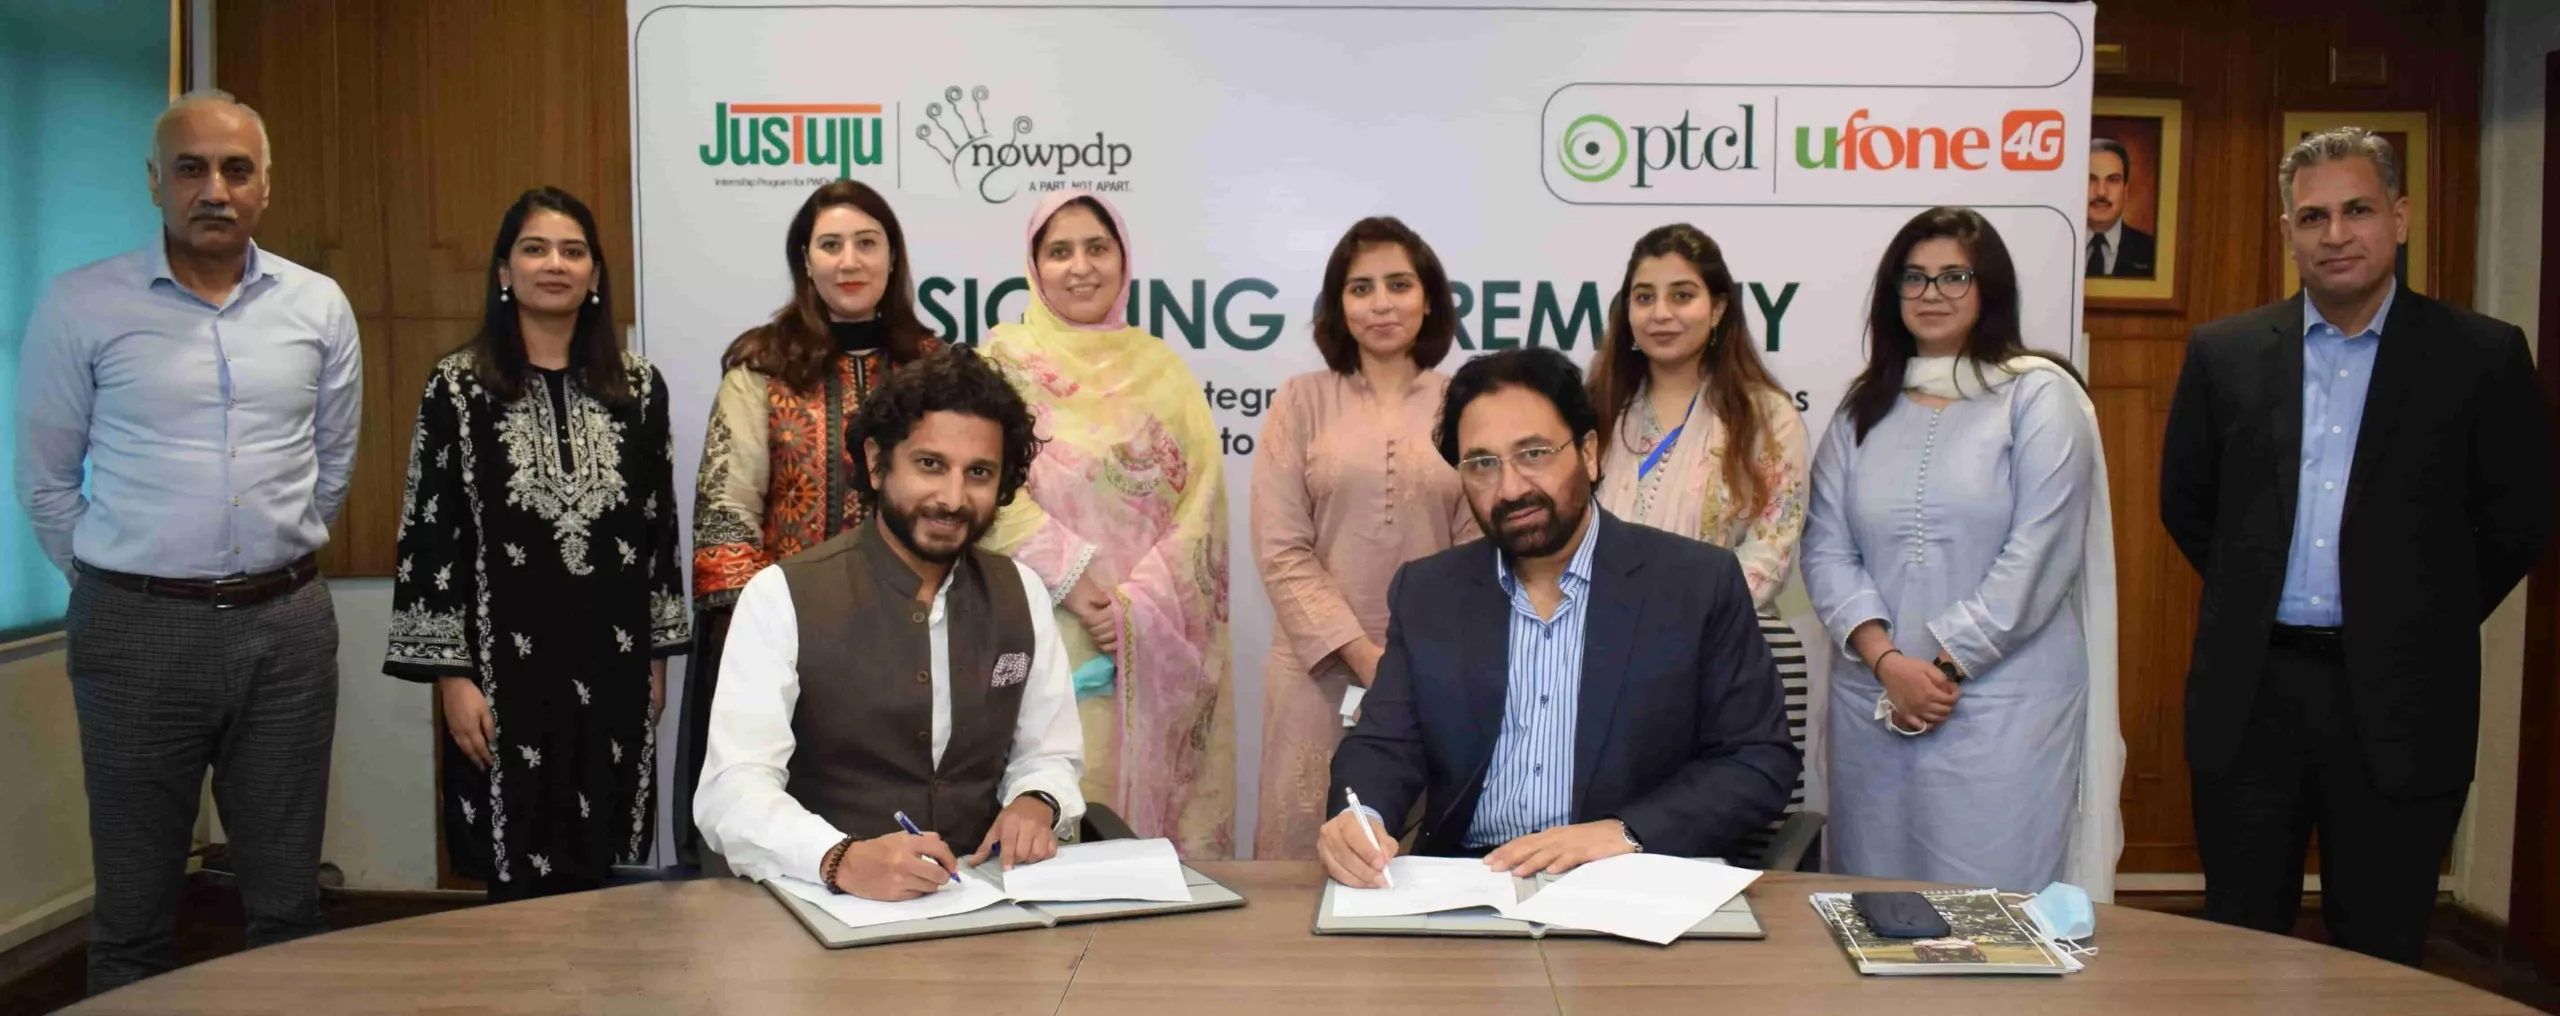 PTCL Group joins hands with NOWPDP for Justuju Internship Program for Persons with Disabilities 